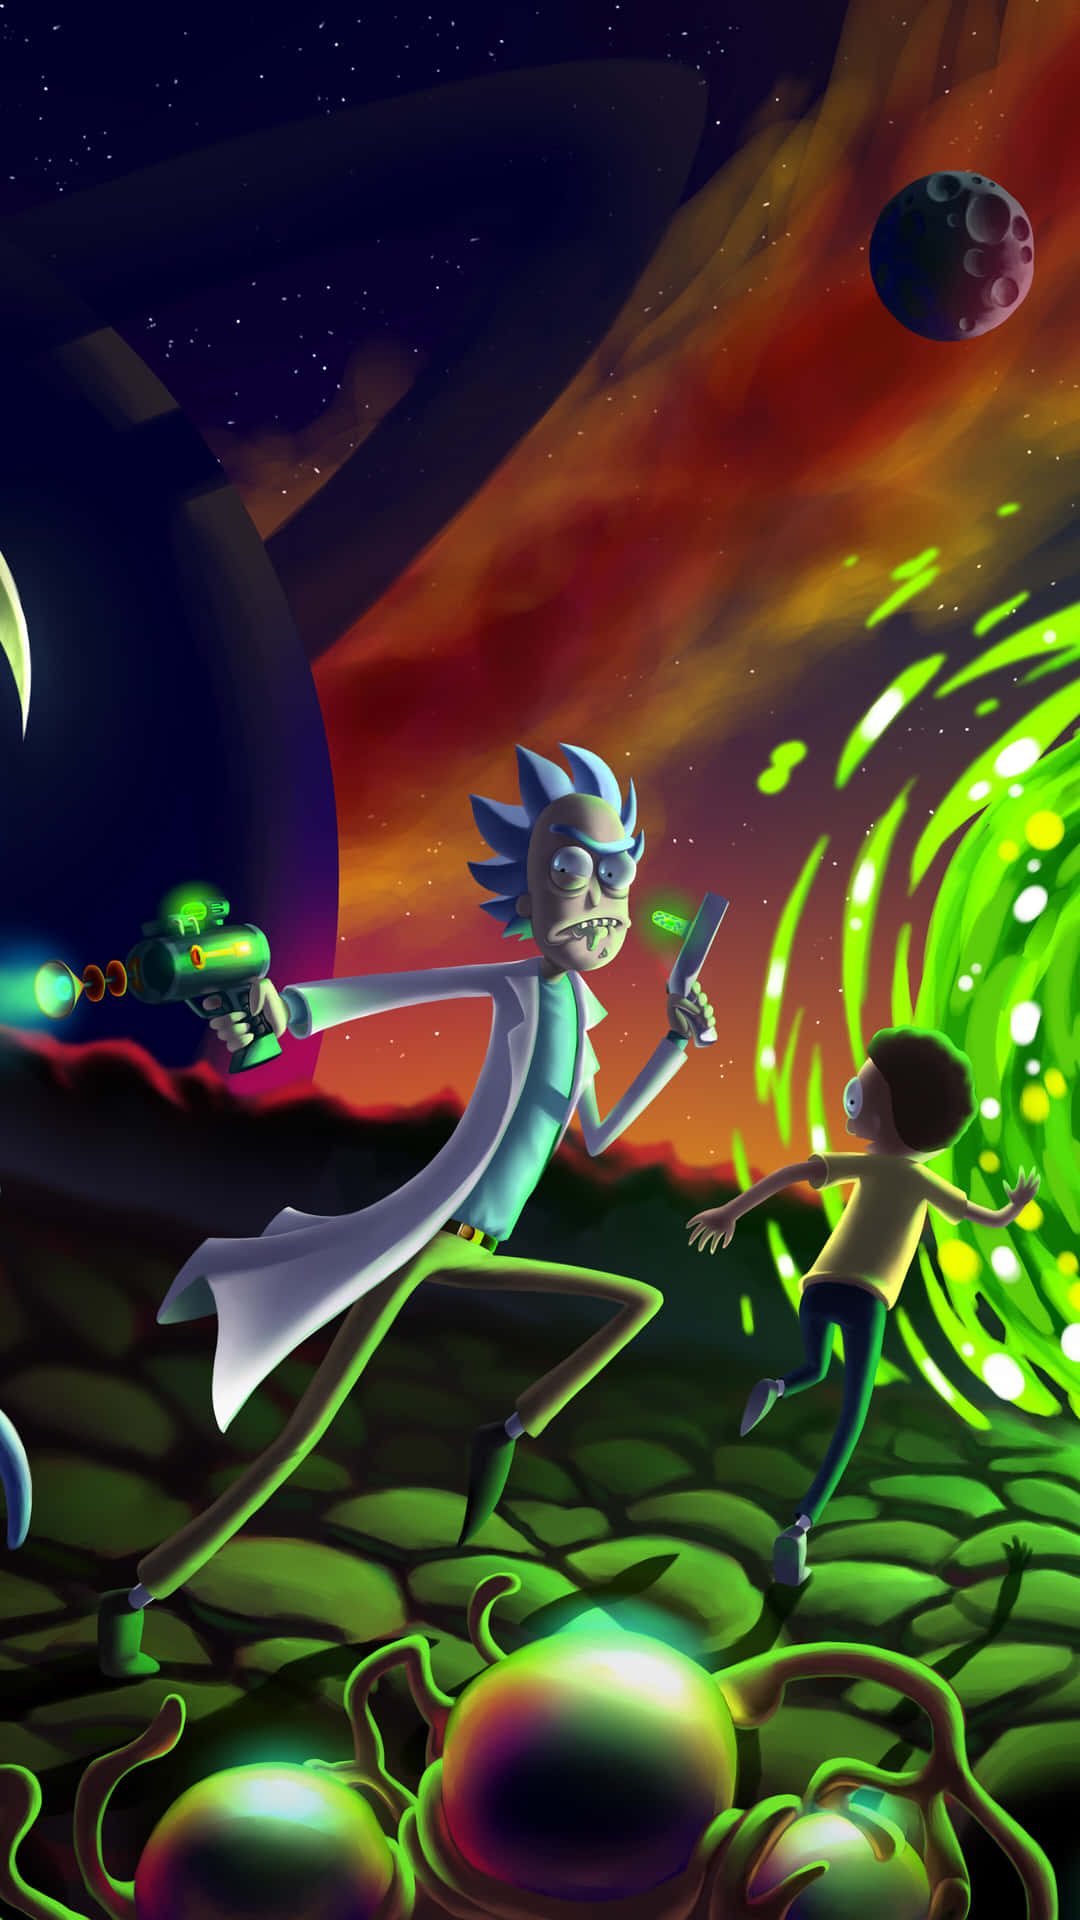 "Travel Through Dimensions With Rick And Morty!" Wallpaper